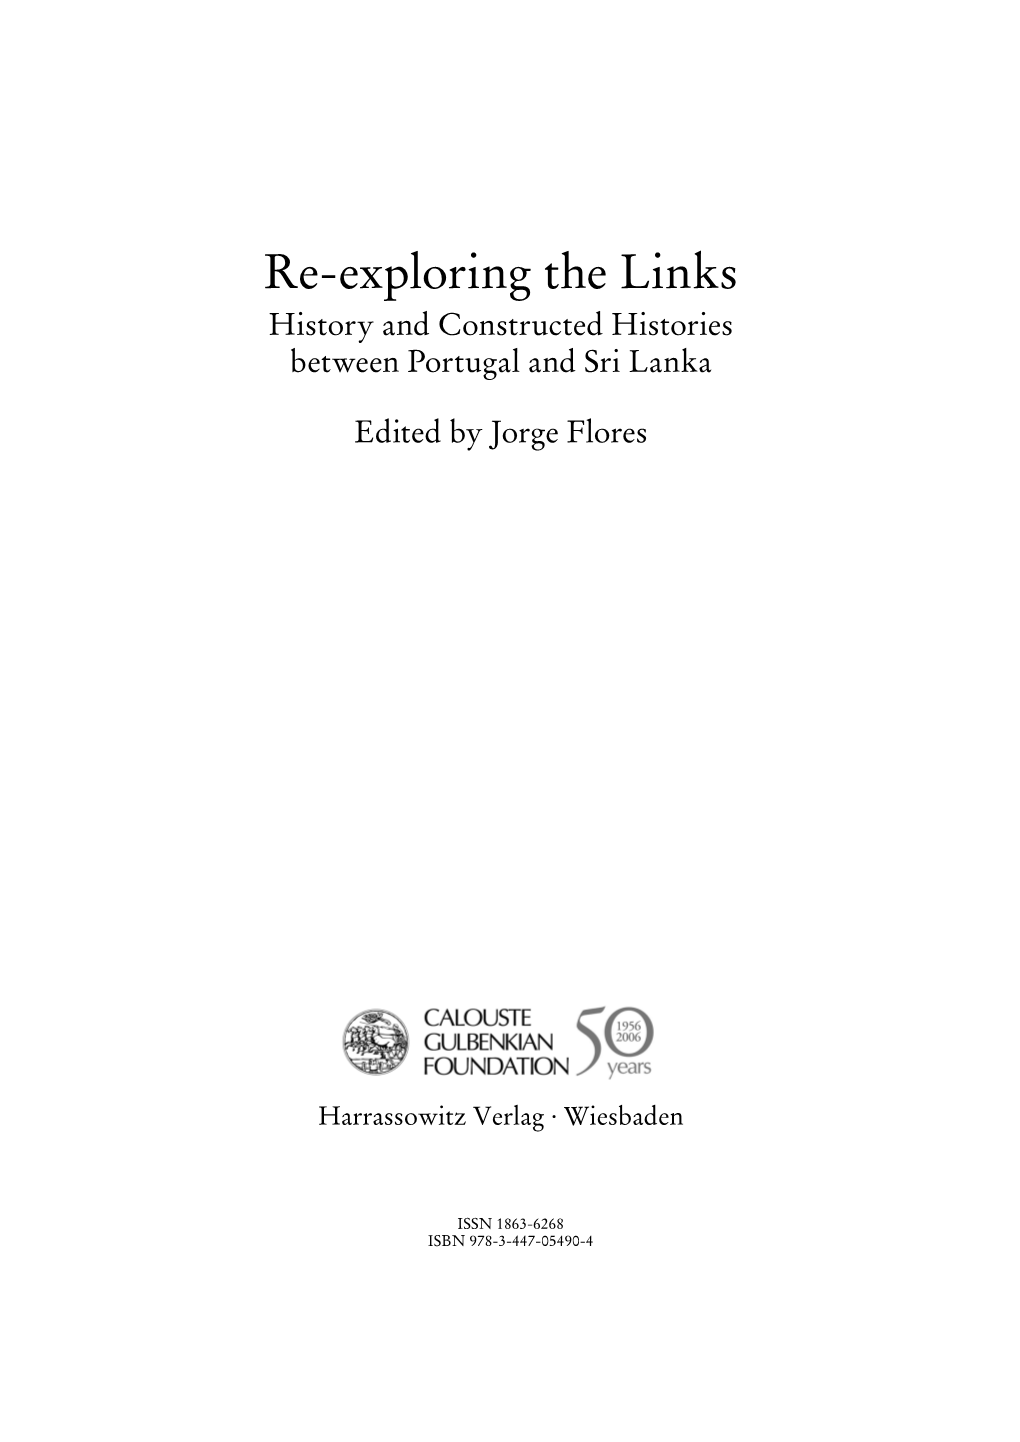 Re-Exploring the Links History and Constructed Histories Between Portugal and Sri Lanka